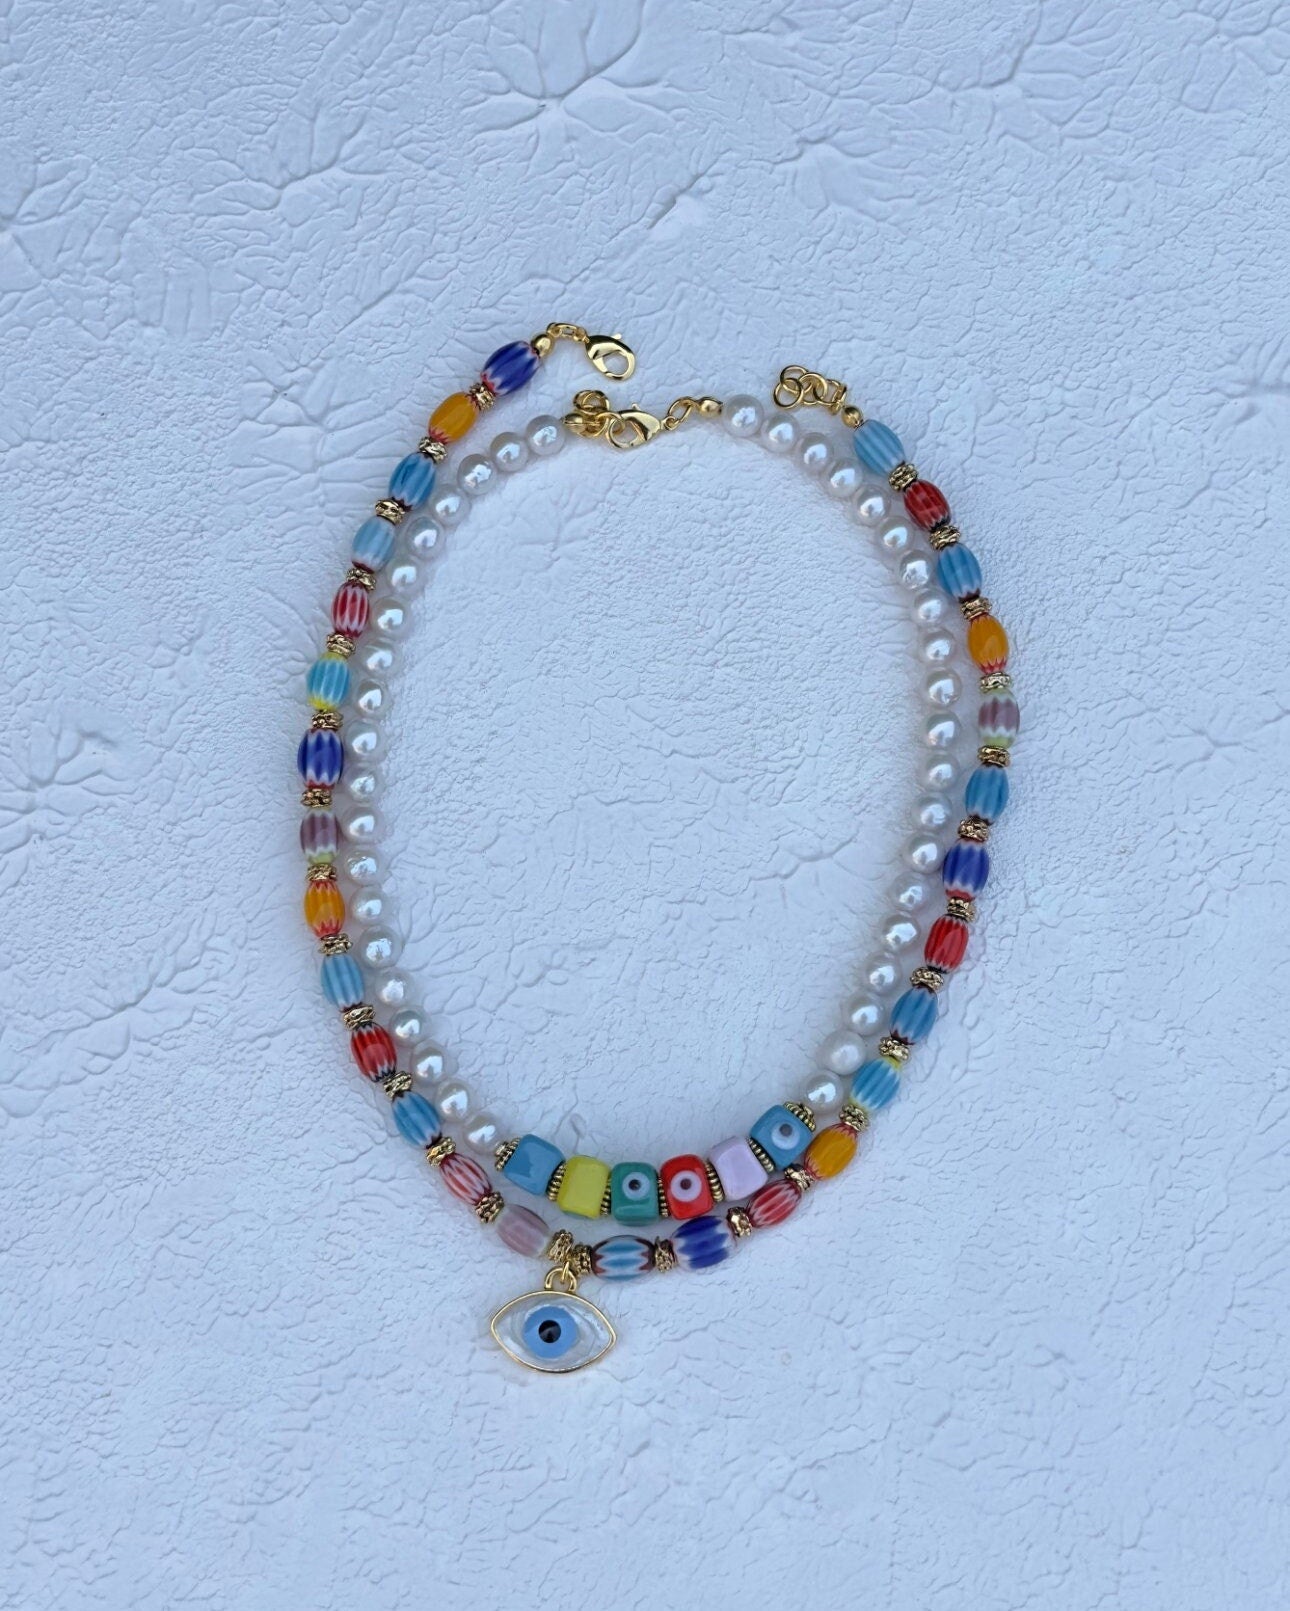 Pearl Necklace, Evil Eye Summer Jewelry, Birthday Gift for Friend, Colorful Handmade Necklace, Statement Jewelry